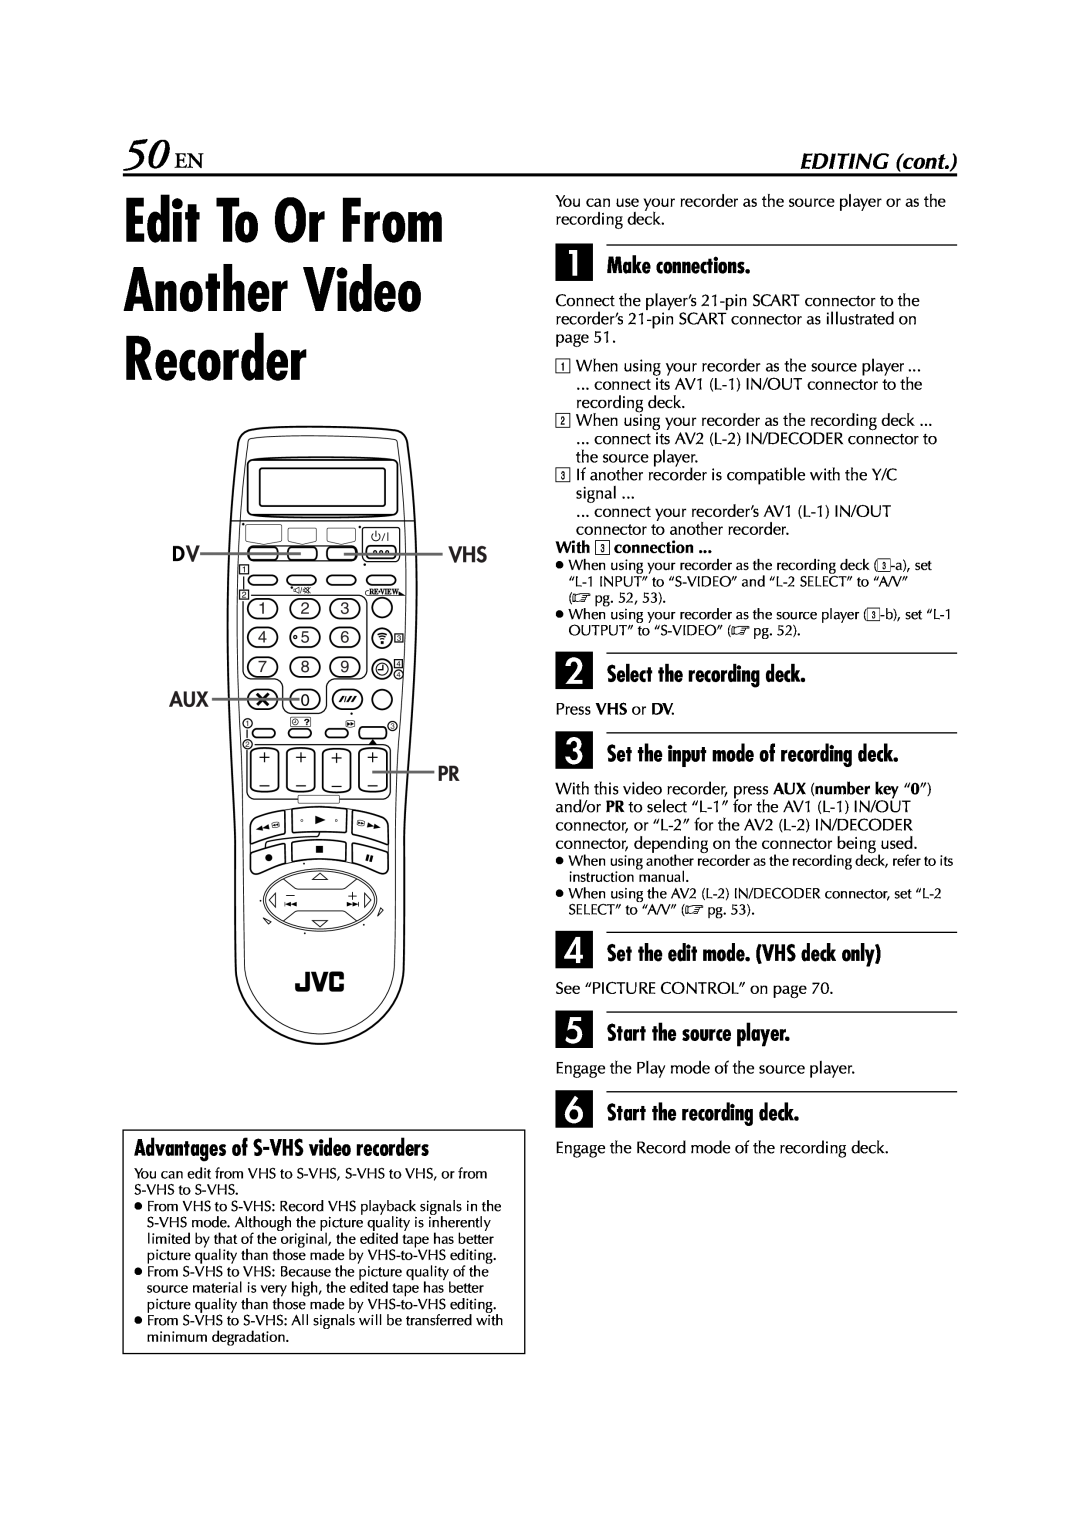 JVC LPT0616-001A Another Video Recorder, 50 EN, Advantages of S-VHS video recorders, E Start the source player 